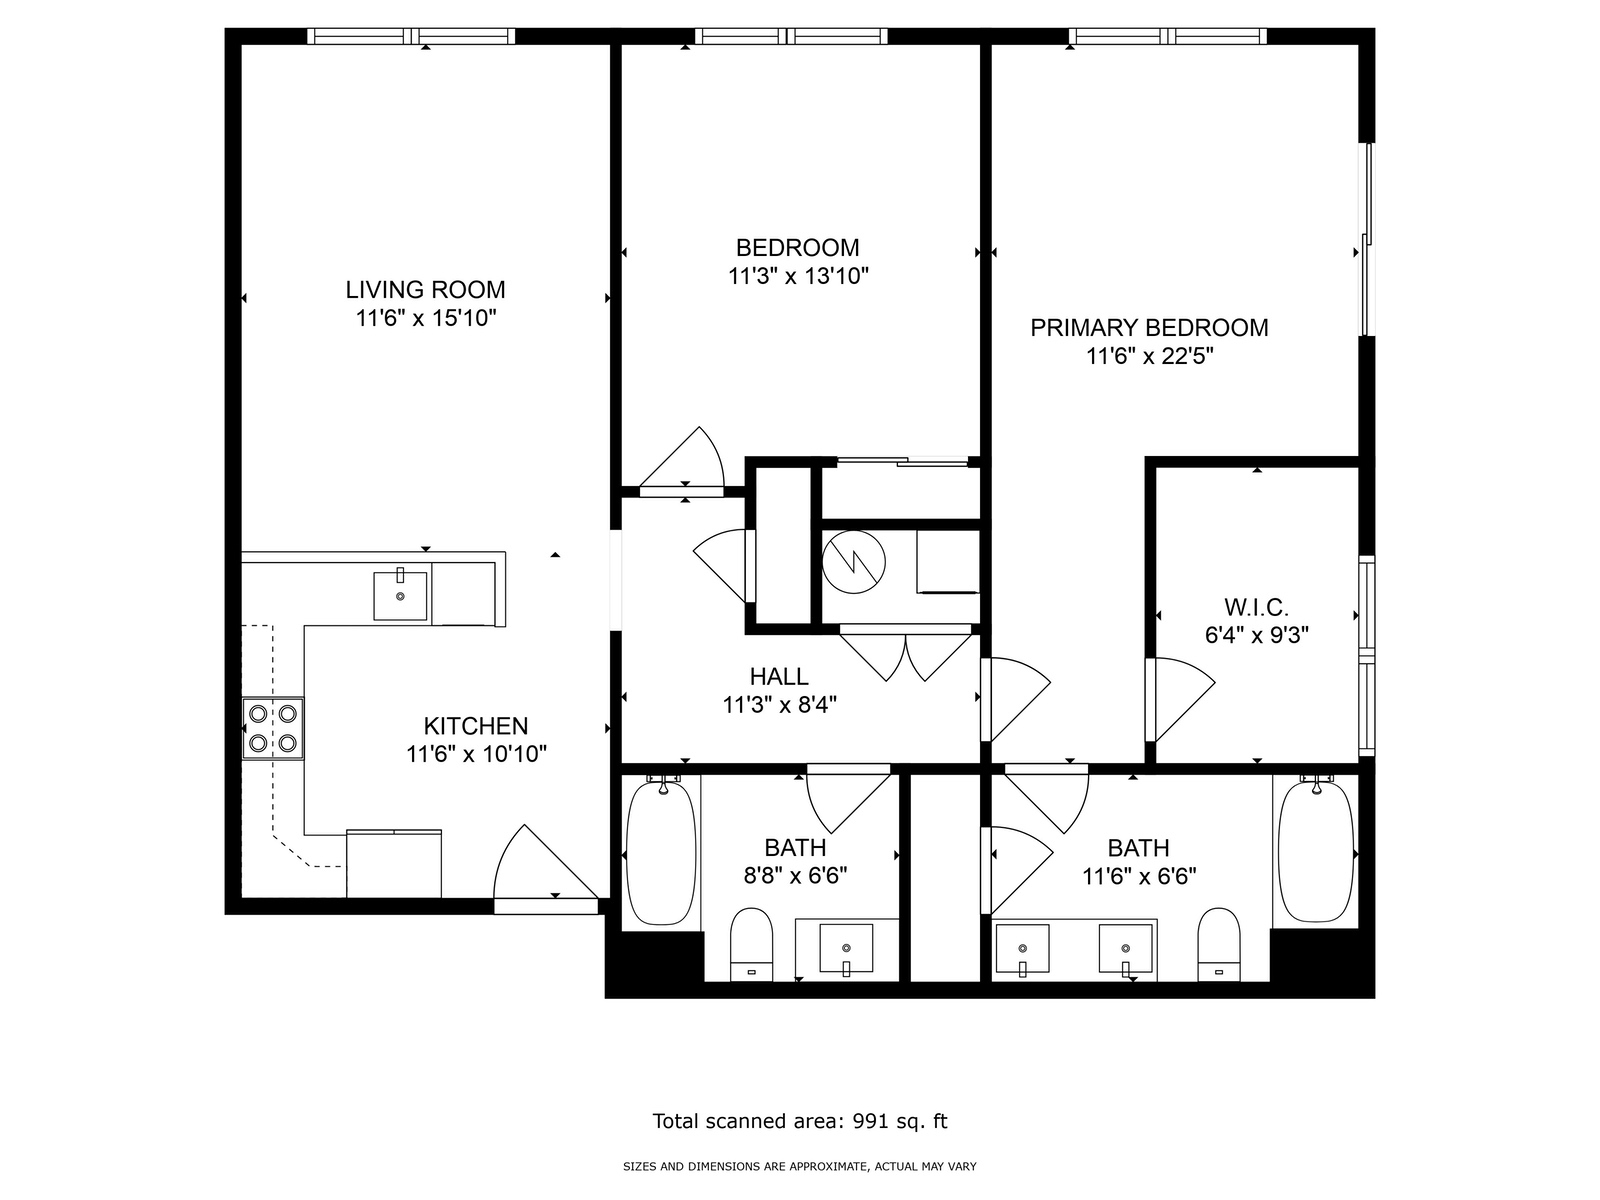 Same room layout of a two bedroom apartment